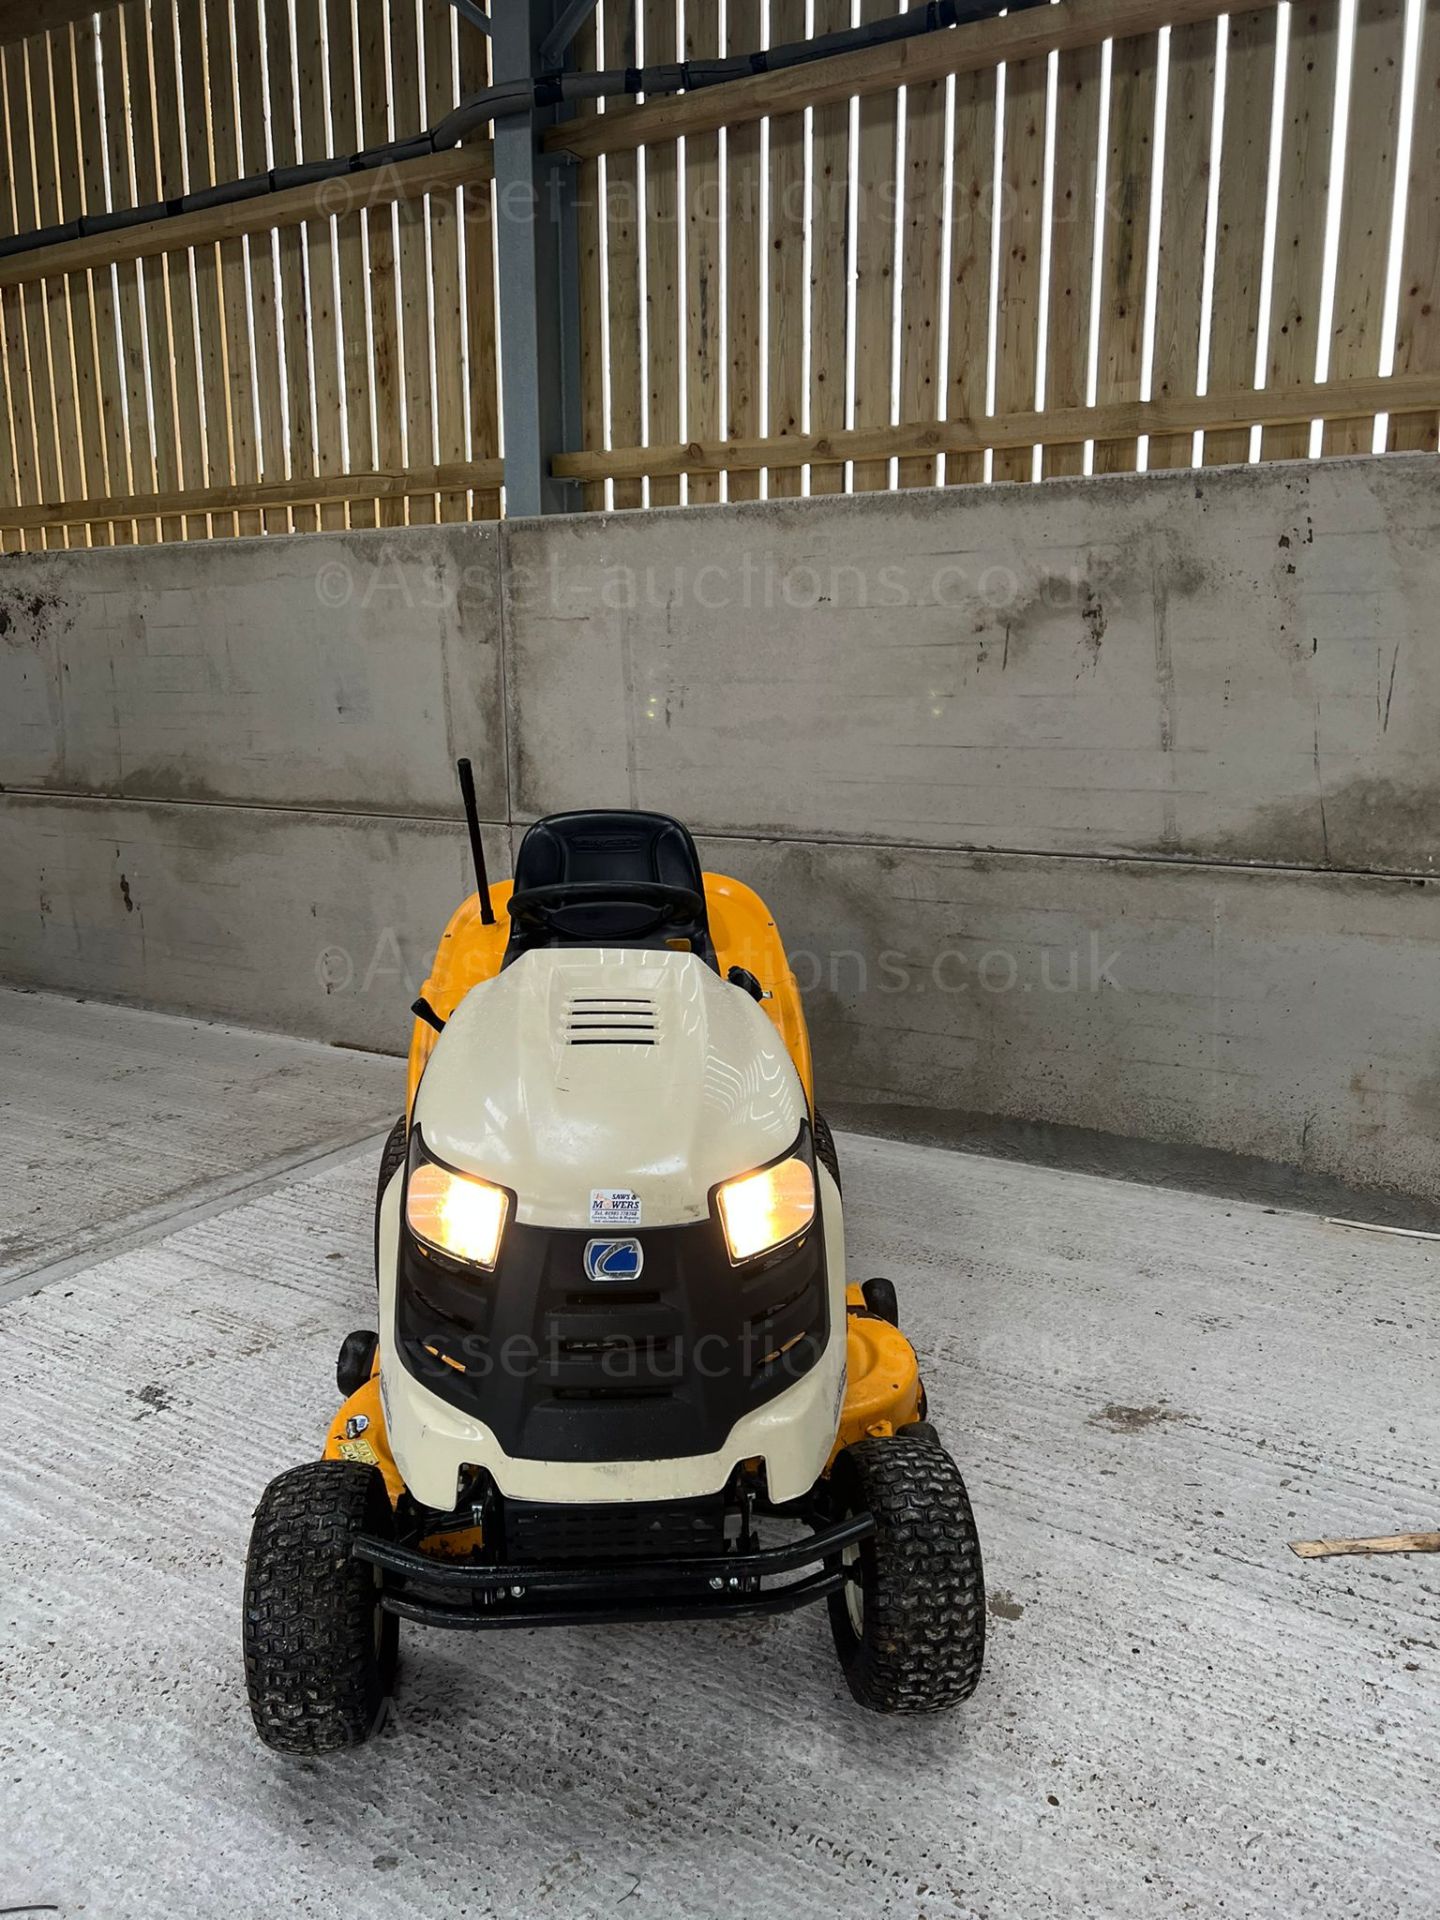 2015 CUB CADET 1020 RIDE ON LAWN MOWER, RUNS WORKS AND CUTS WELL, ONLY 250 HOURS FROM NEW *NO VAT* - Image 2 of 6